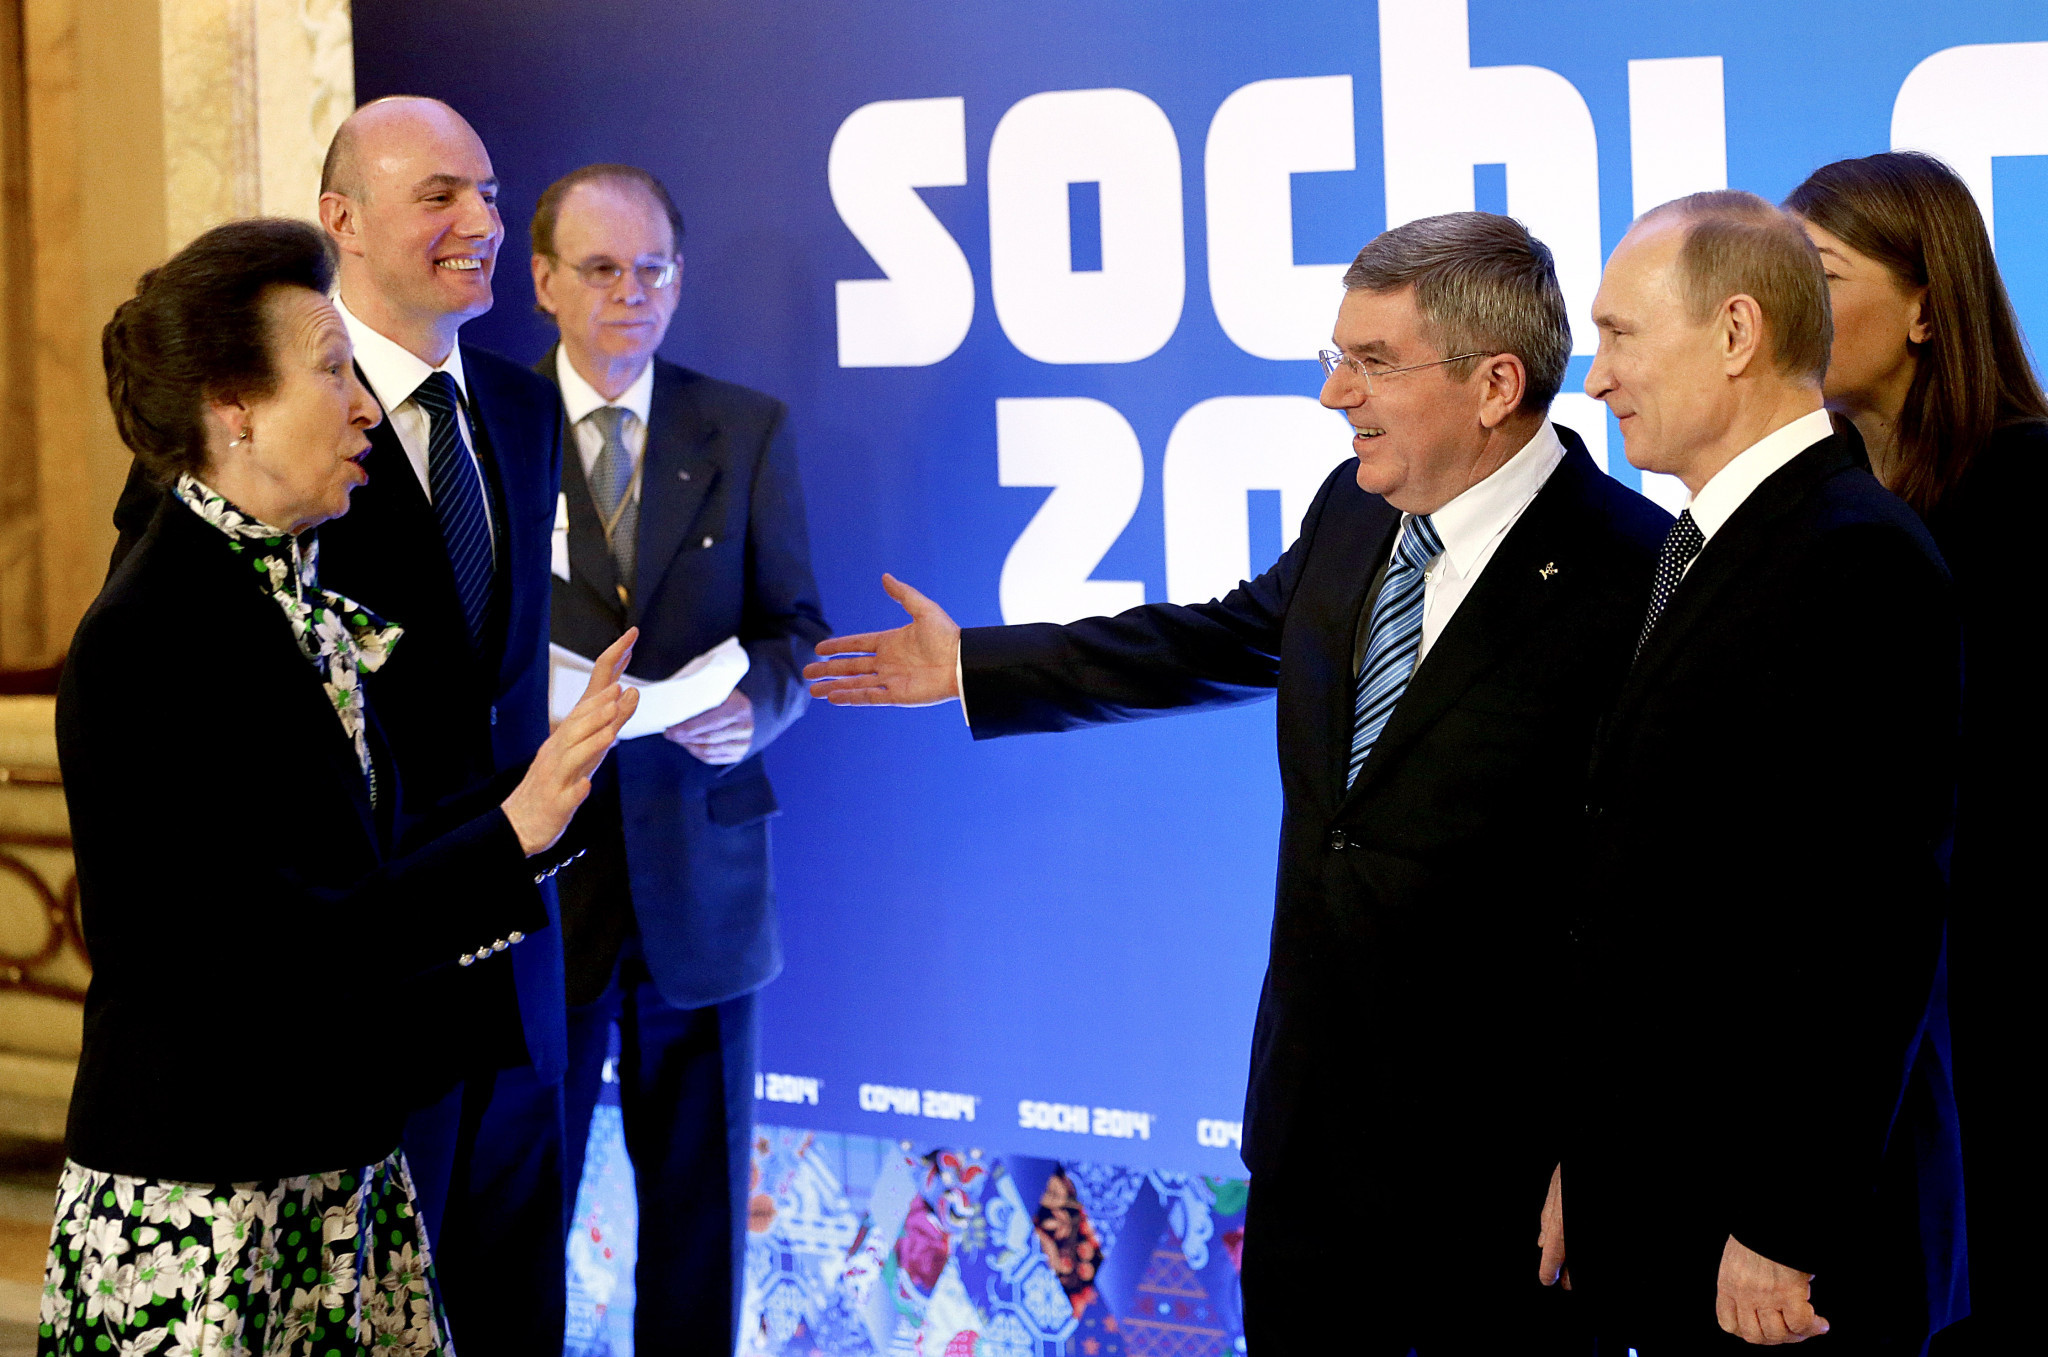 Thomas Bach, Vladimir Putin and Sochi 2014 President Dmitry Chernyshenko, centre left, all pictured together, along with British IOC member Princess Anne, at Sochi 2014 ©Getty Images